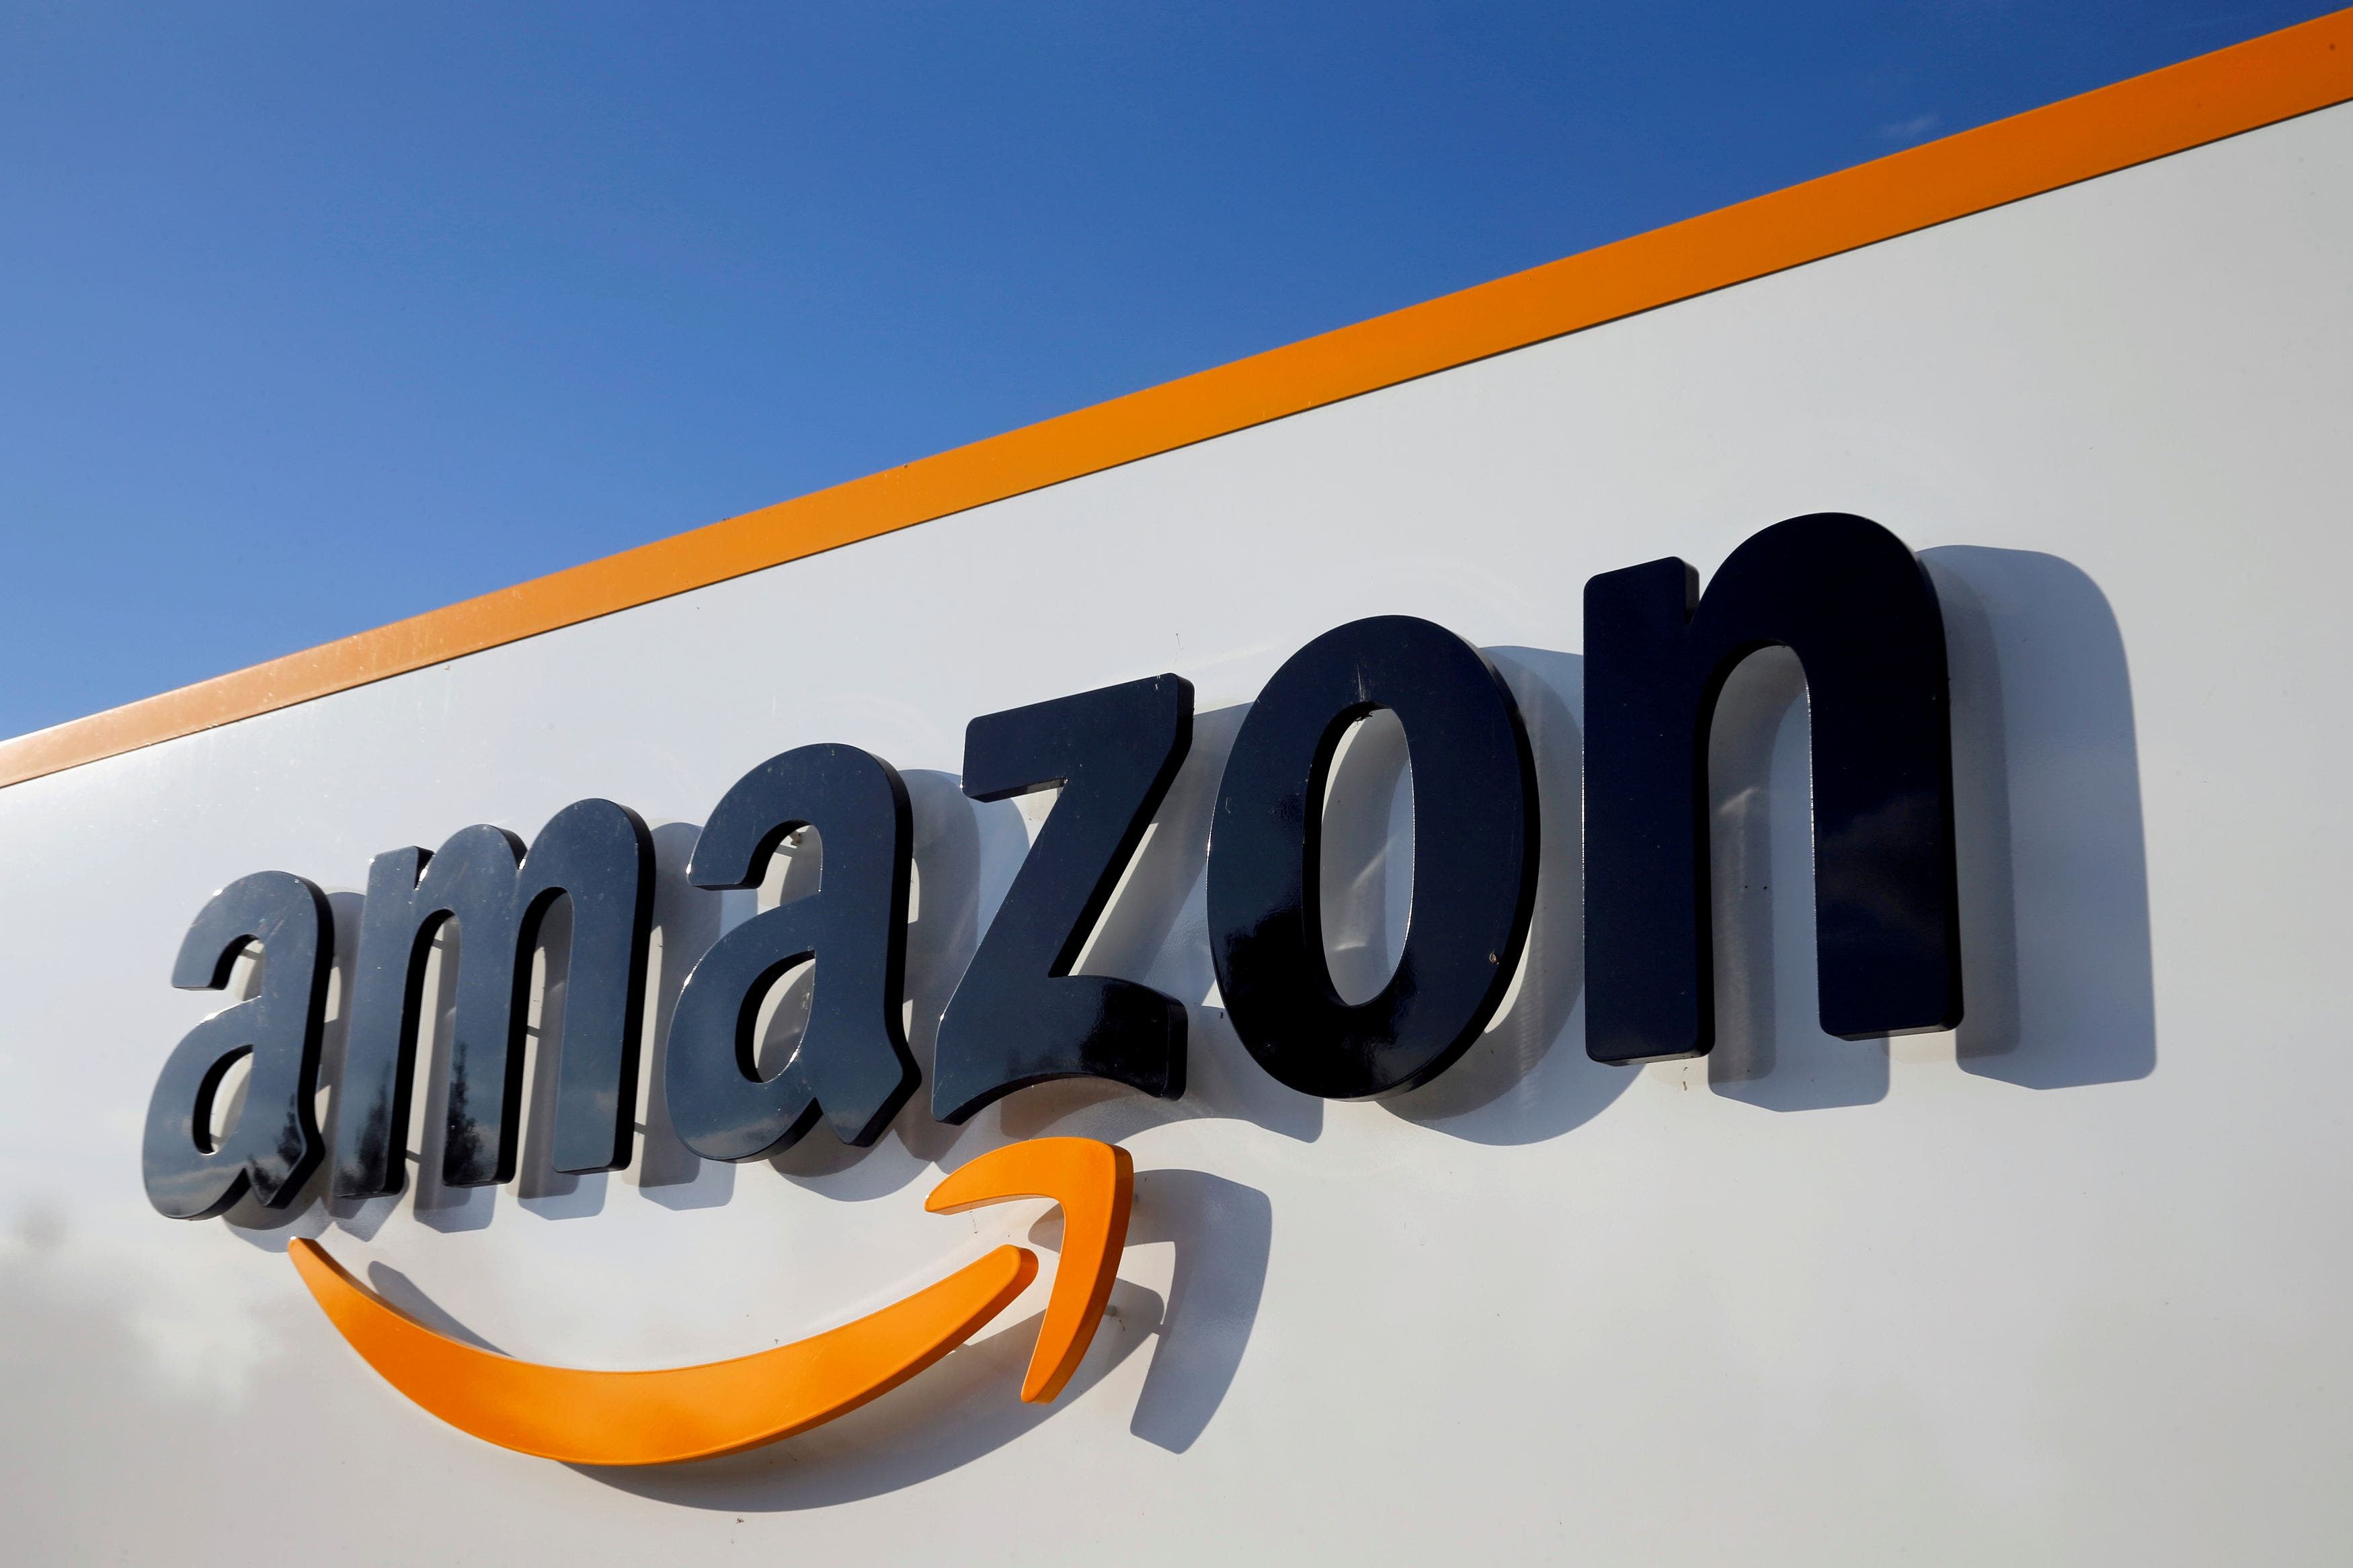 Amazon, Target And 3 Other Stocks Insiders Are Selling